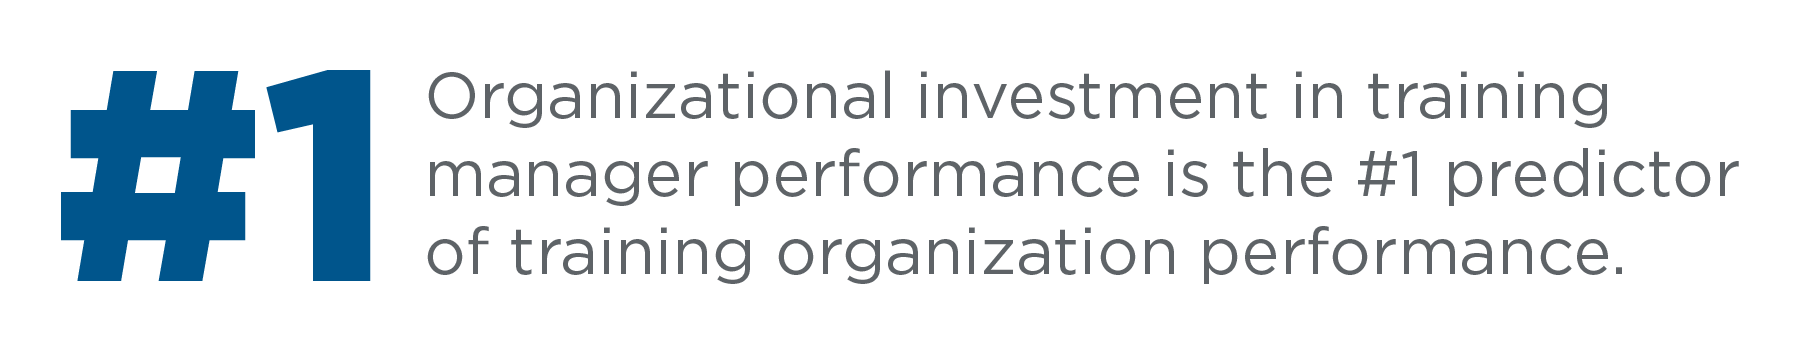 Organizational Investment in training manager performance is the #1 predictor of training organization performance